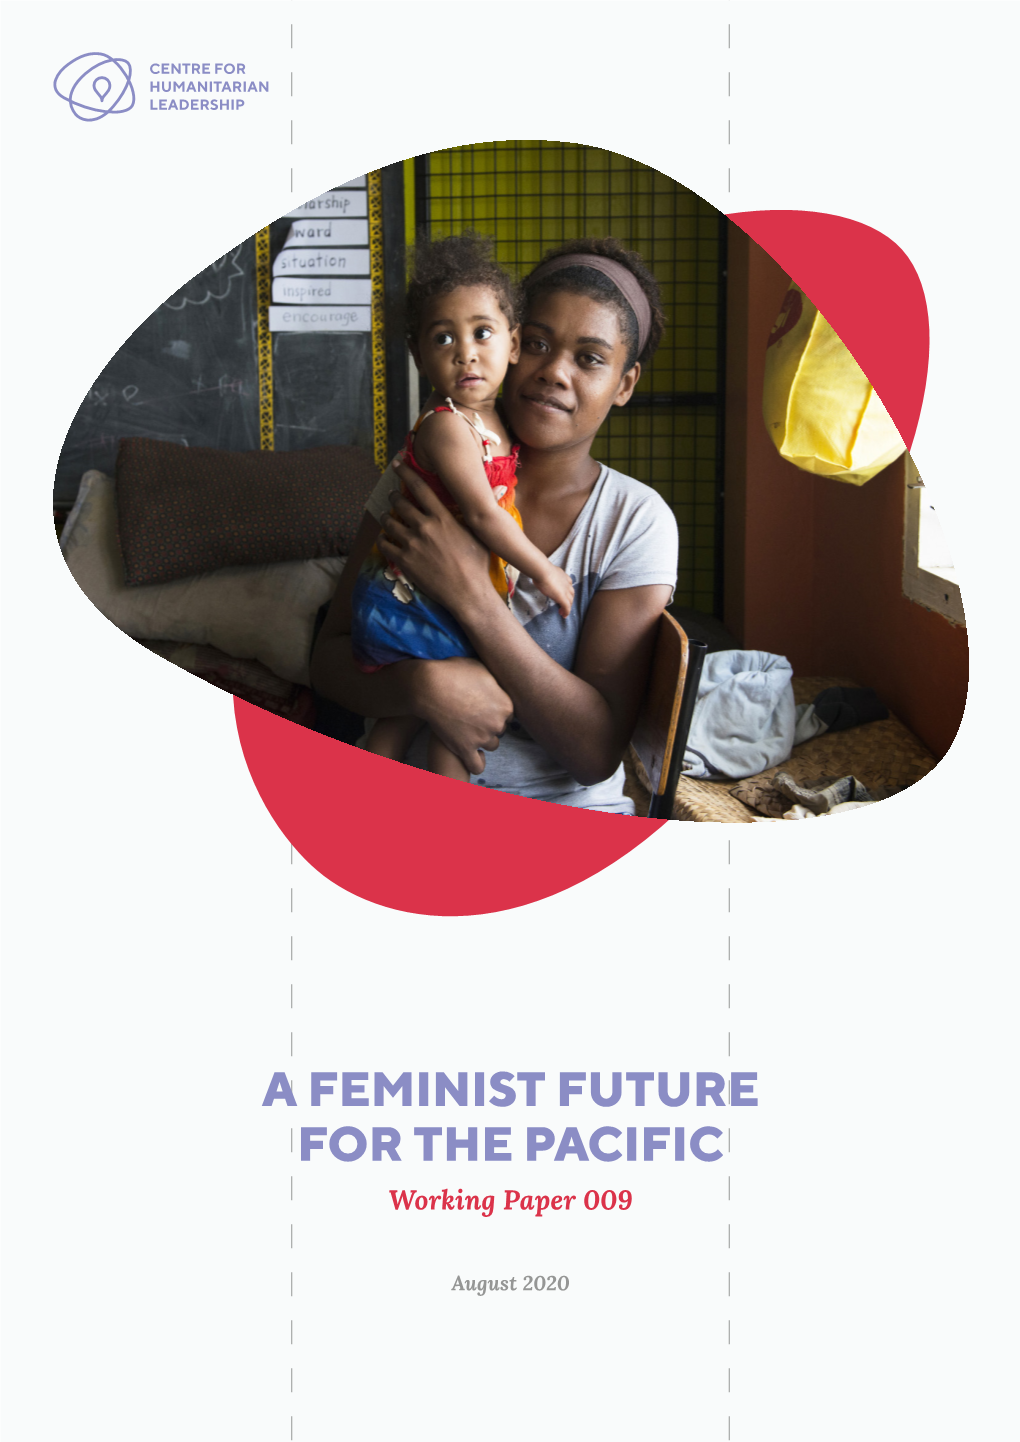 A FEMINIST FUTURE for the PACIFIC Working Paper 009